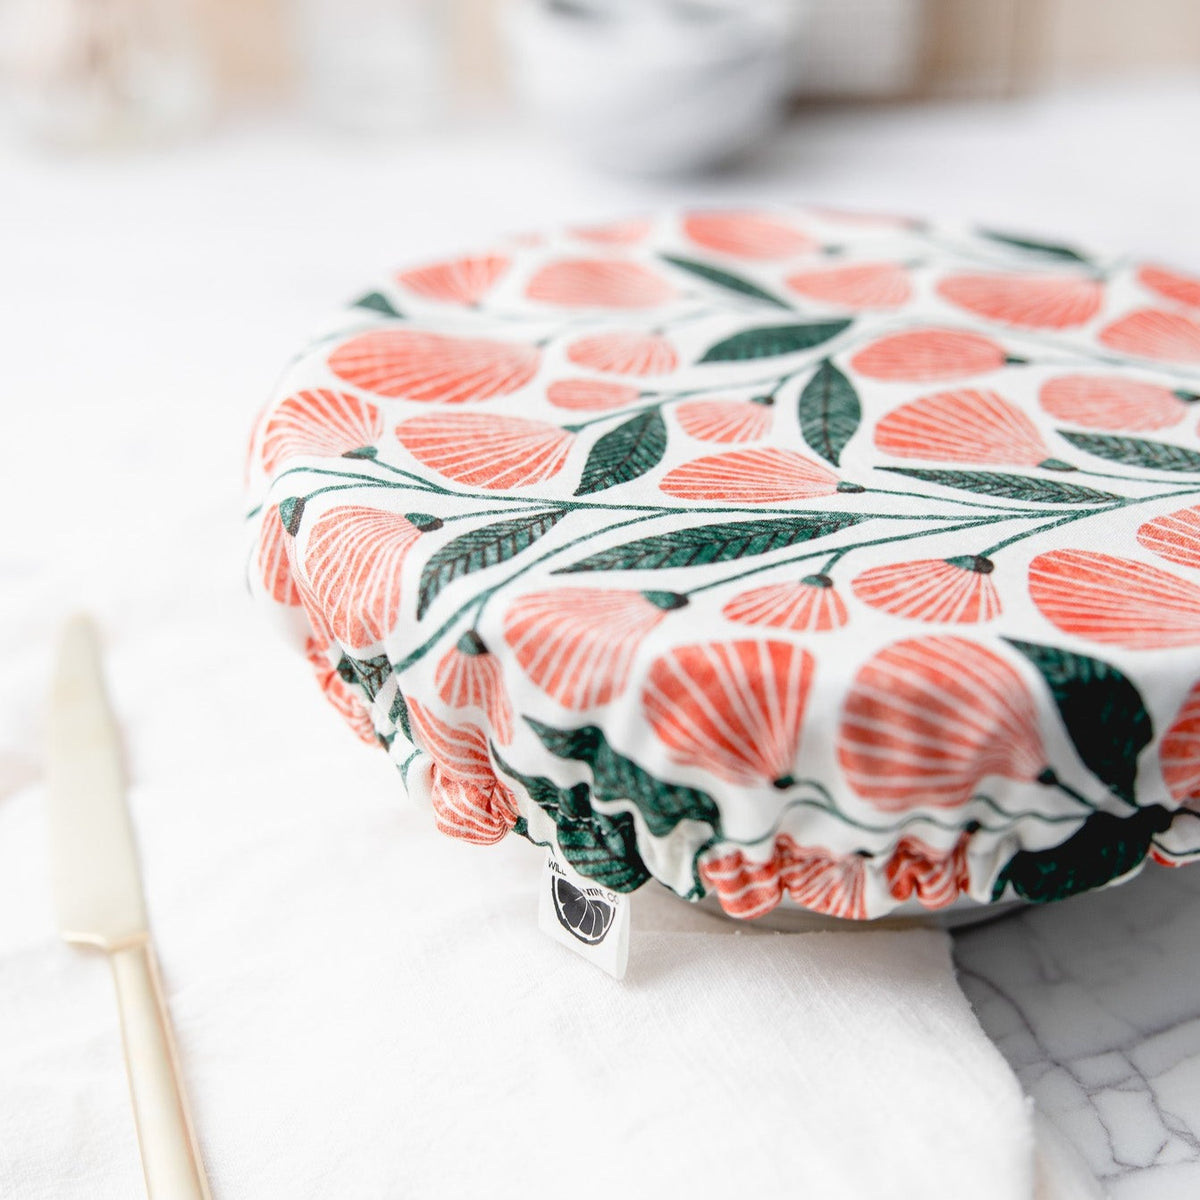 Art Deco Floral Dish Cover by Wild Clementine Co.